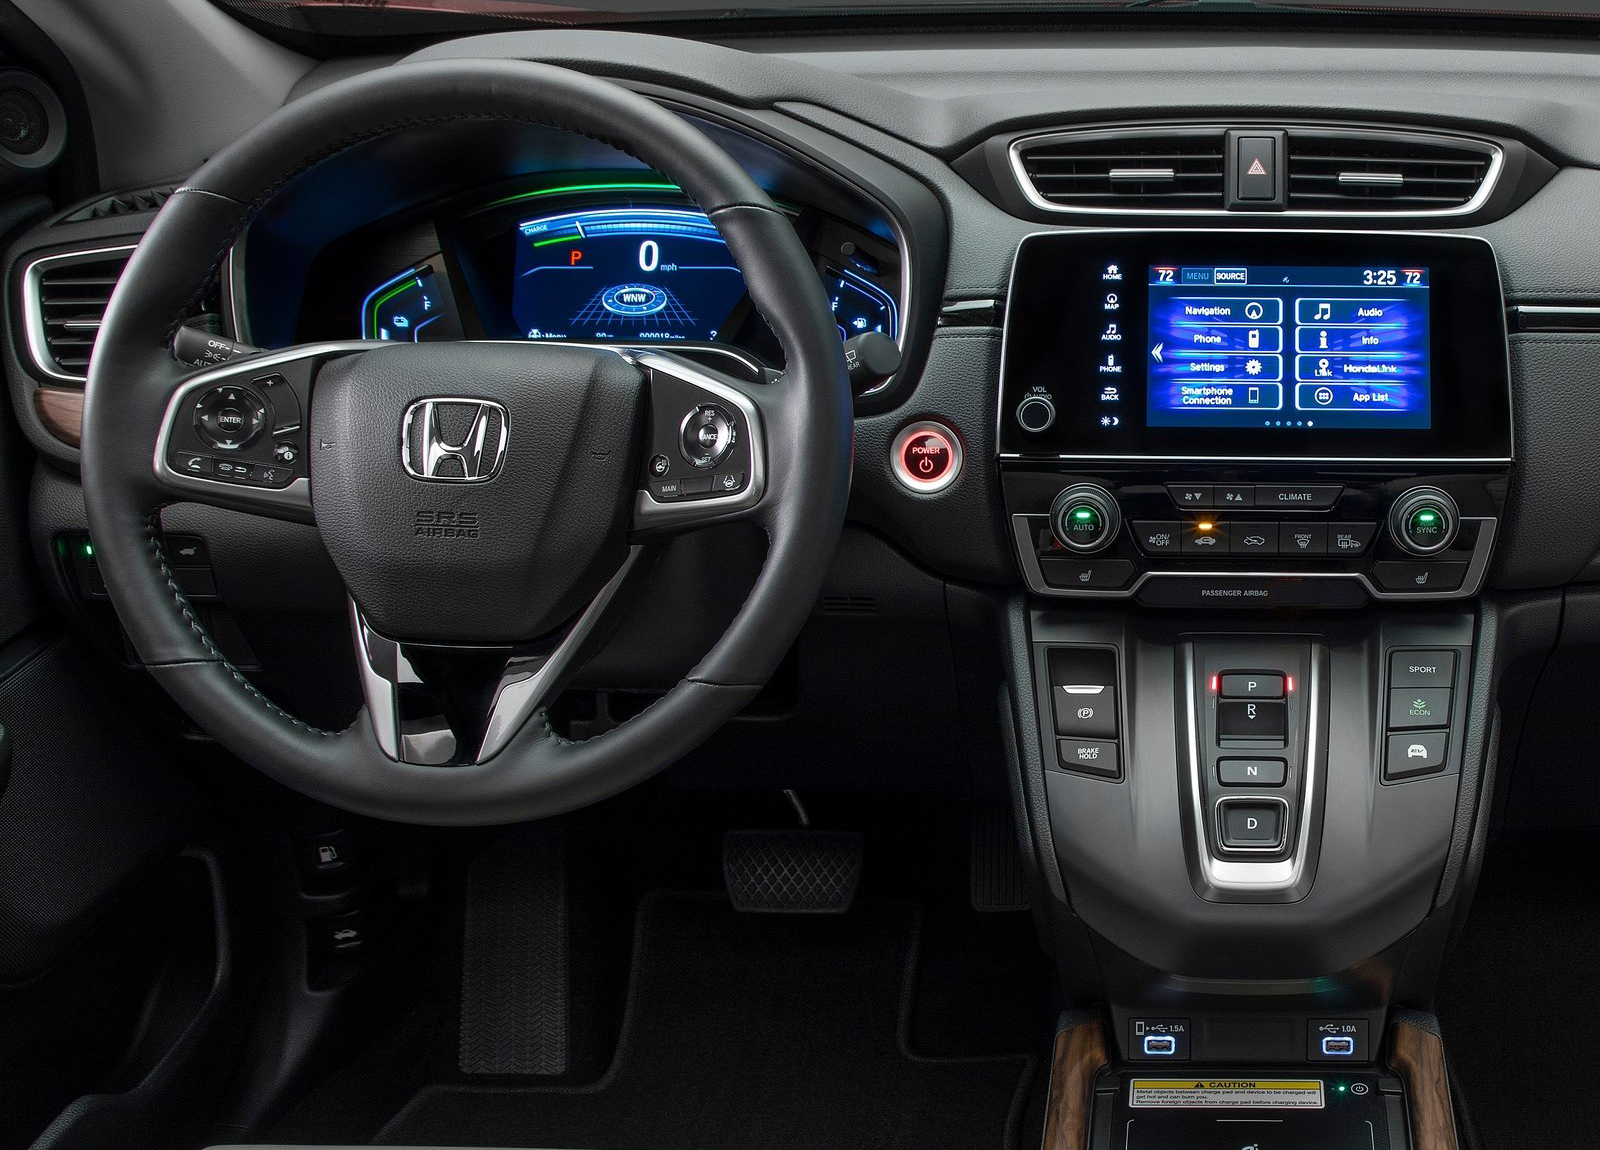 Honda’s New Interior Wants You To Keep Your Eyes On The Road